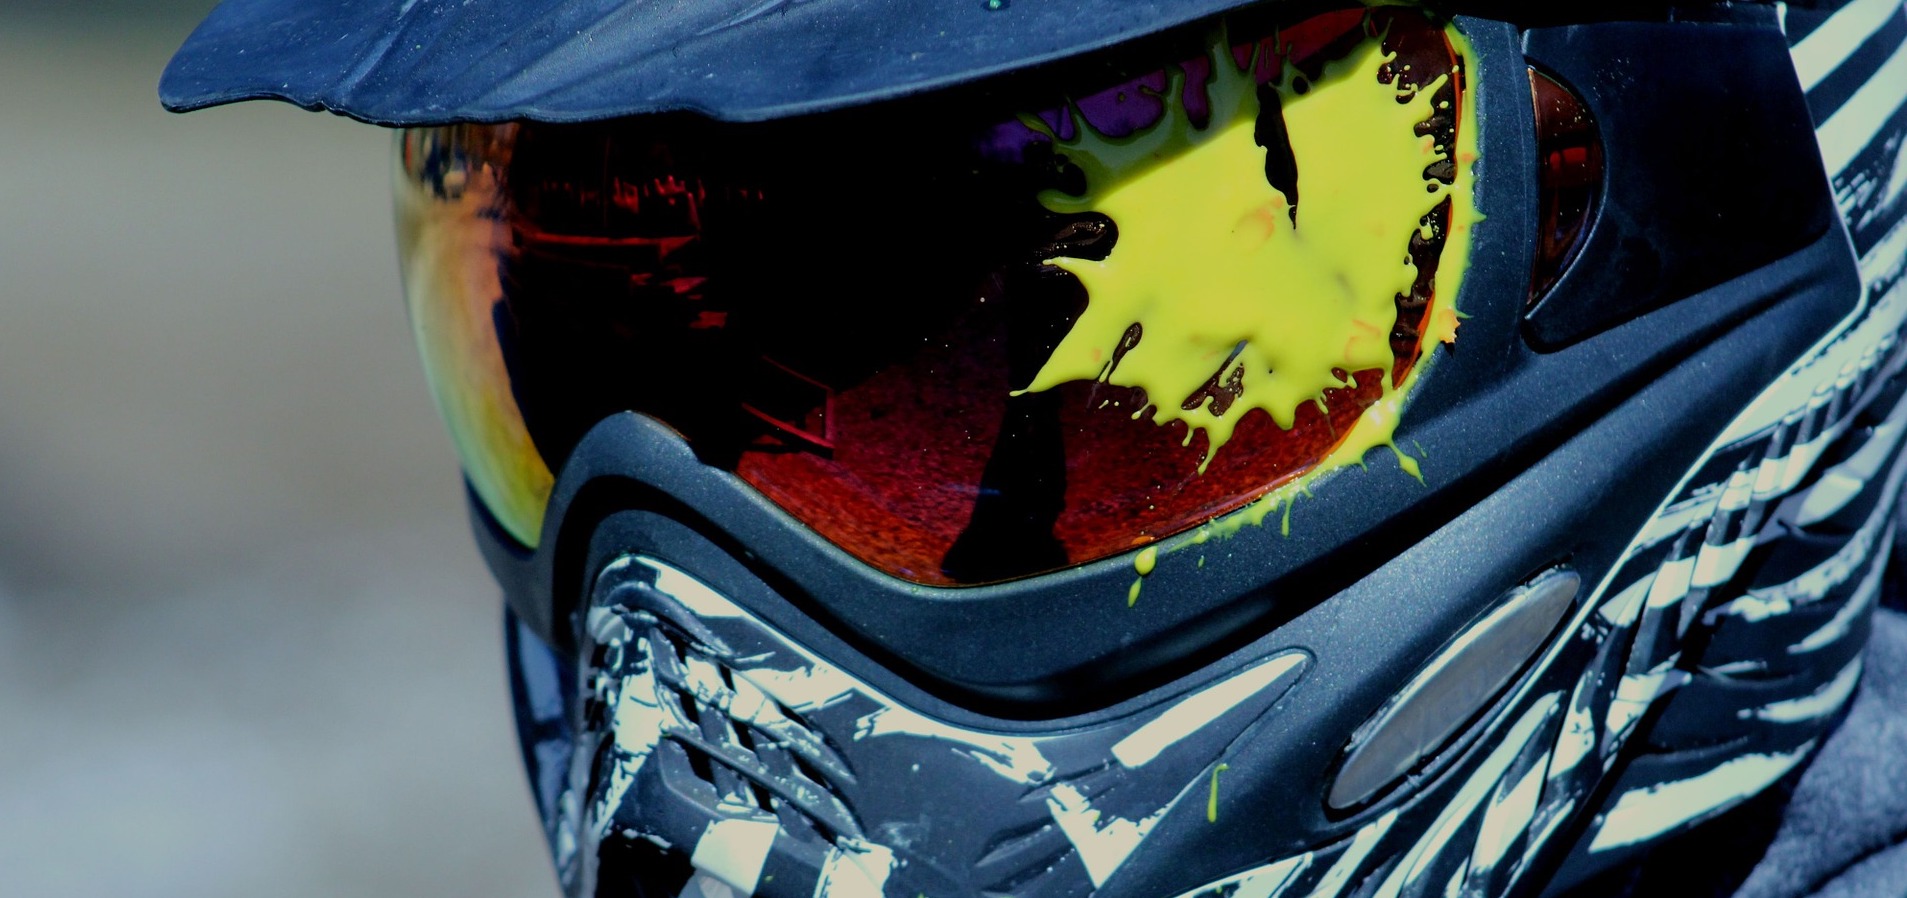 A close-up of a paintballer whose visor is covered in paint